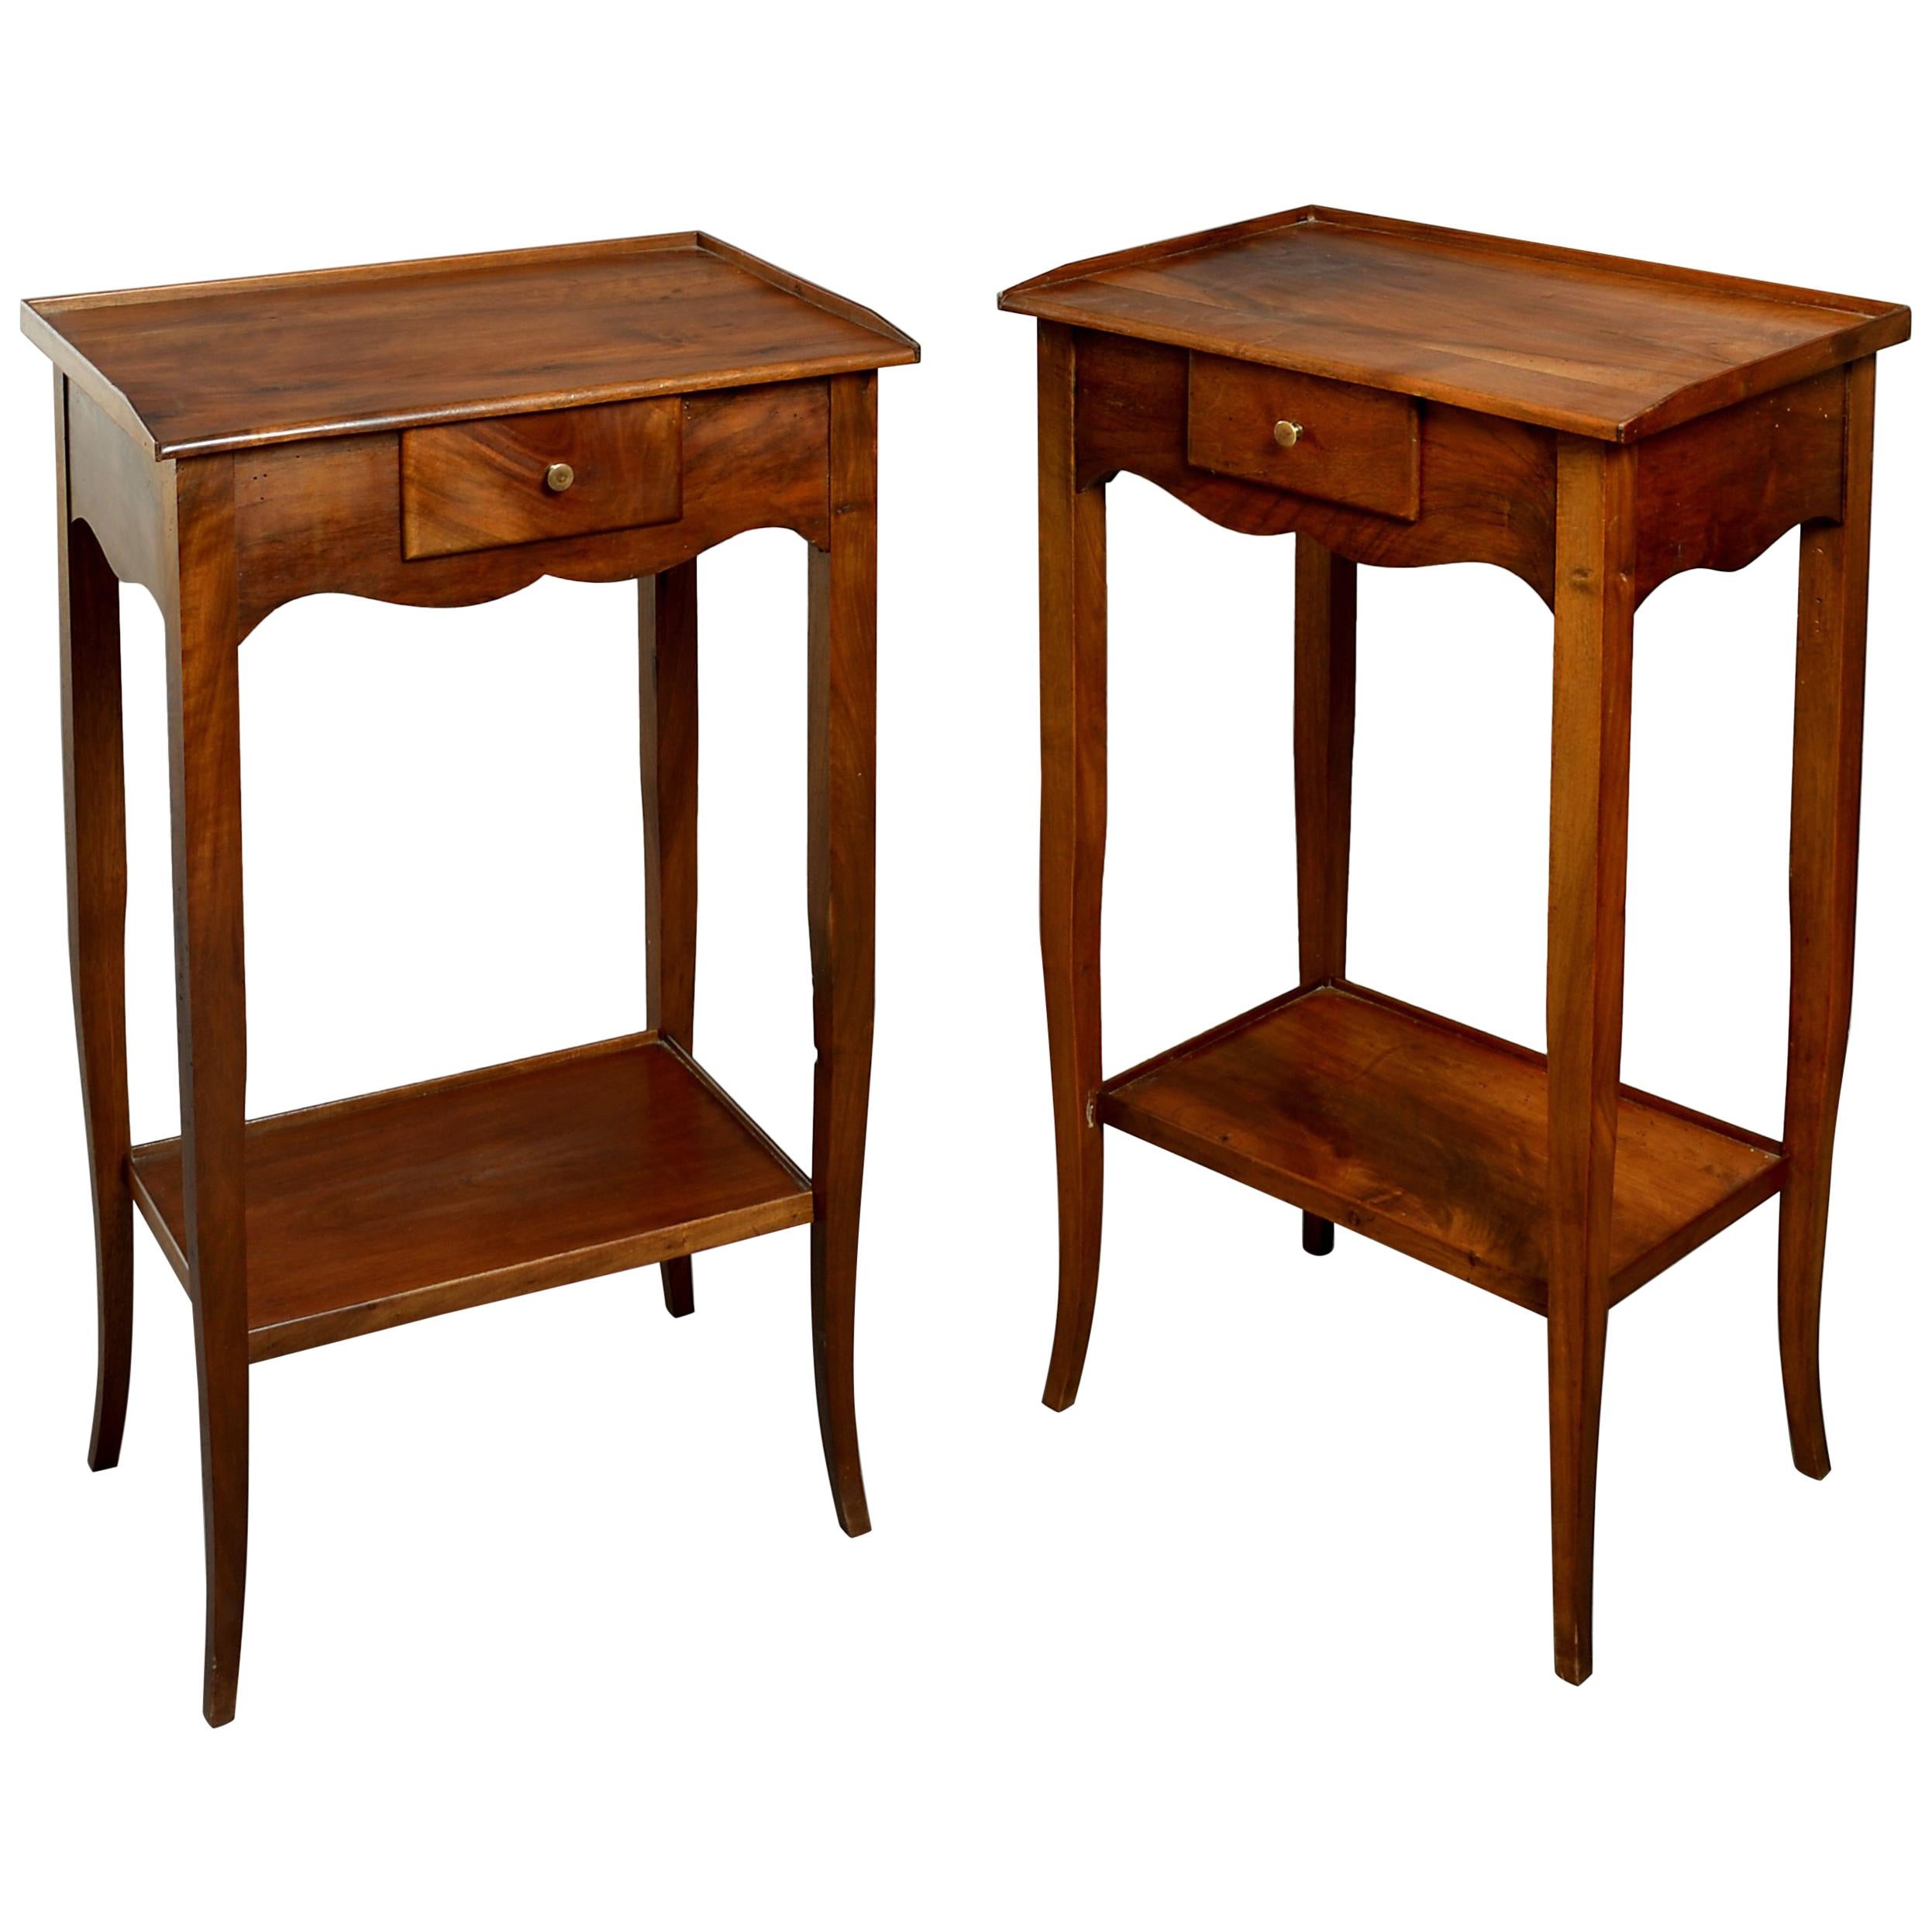 Pair of Walnut Bedside Tables in the Louis XV Manner